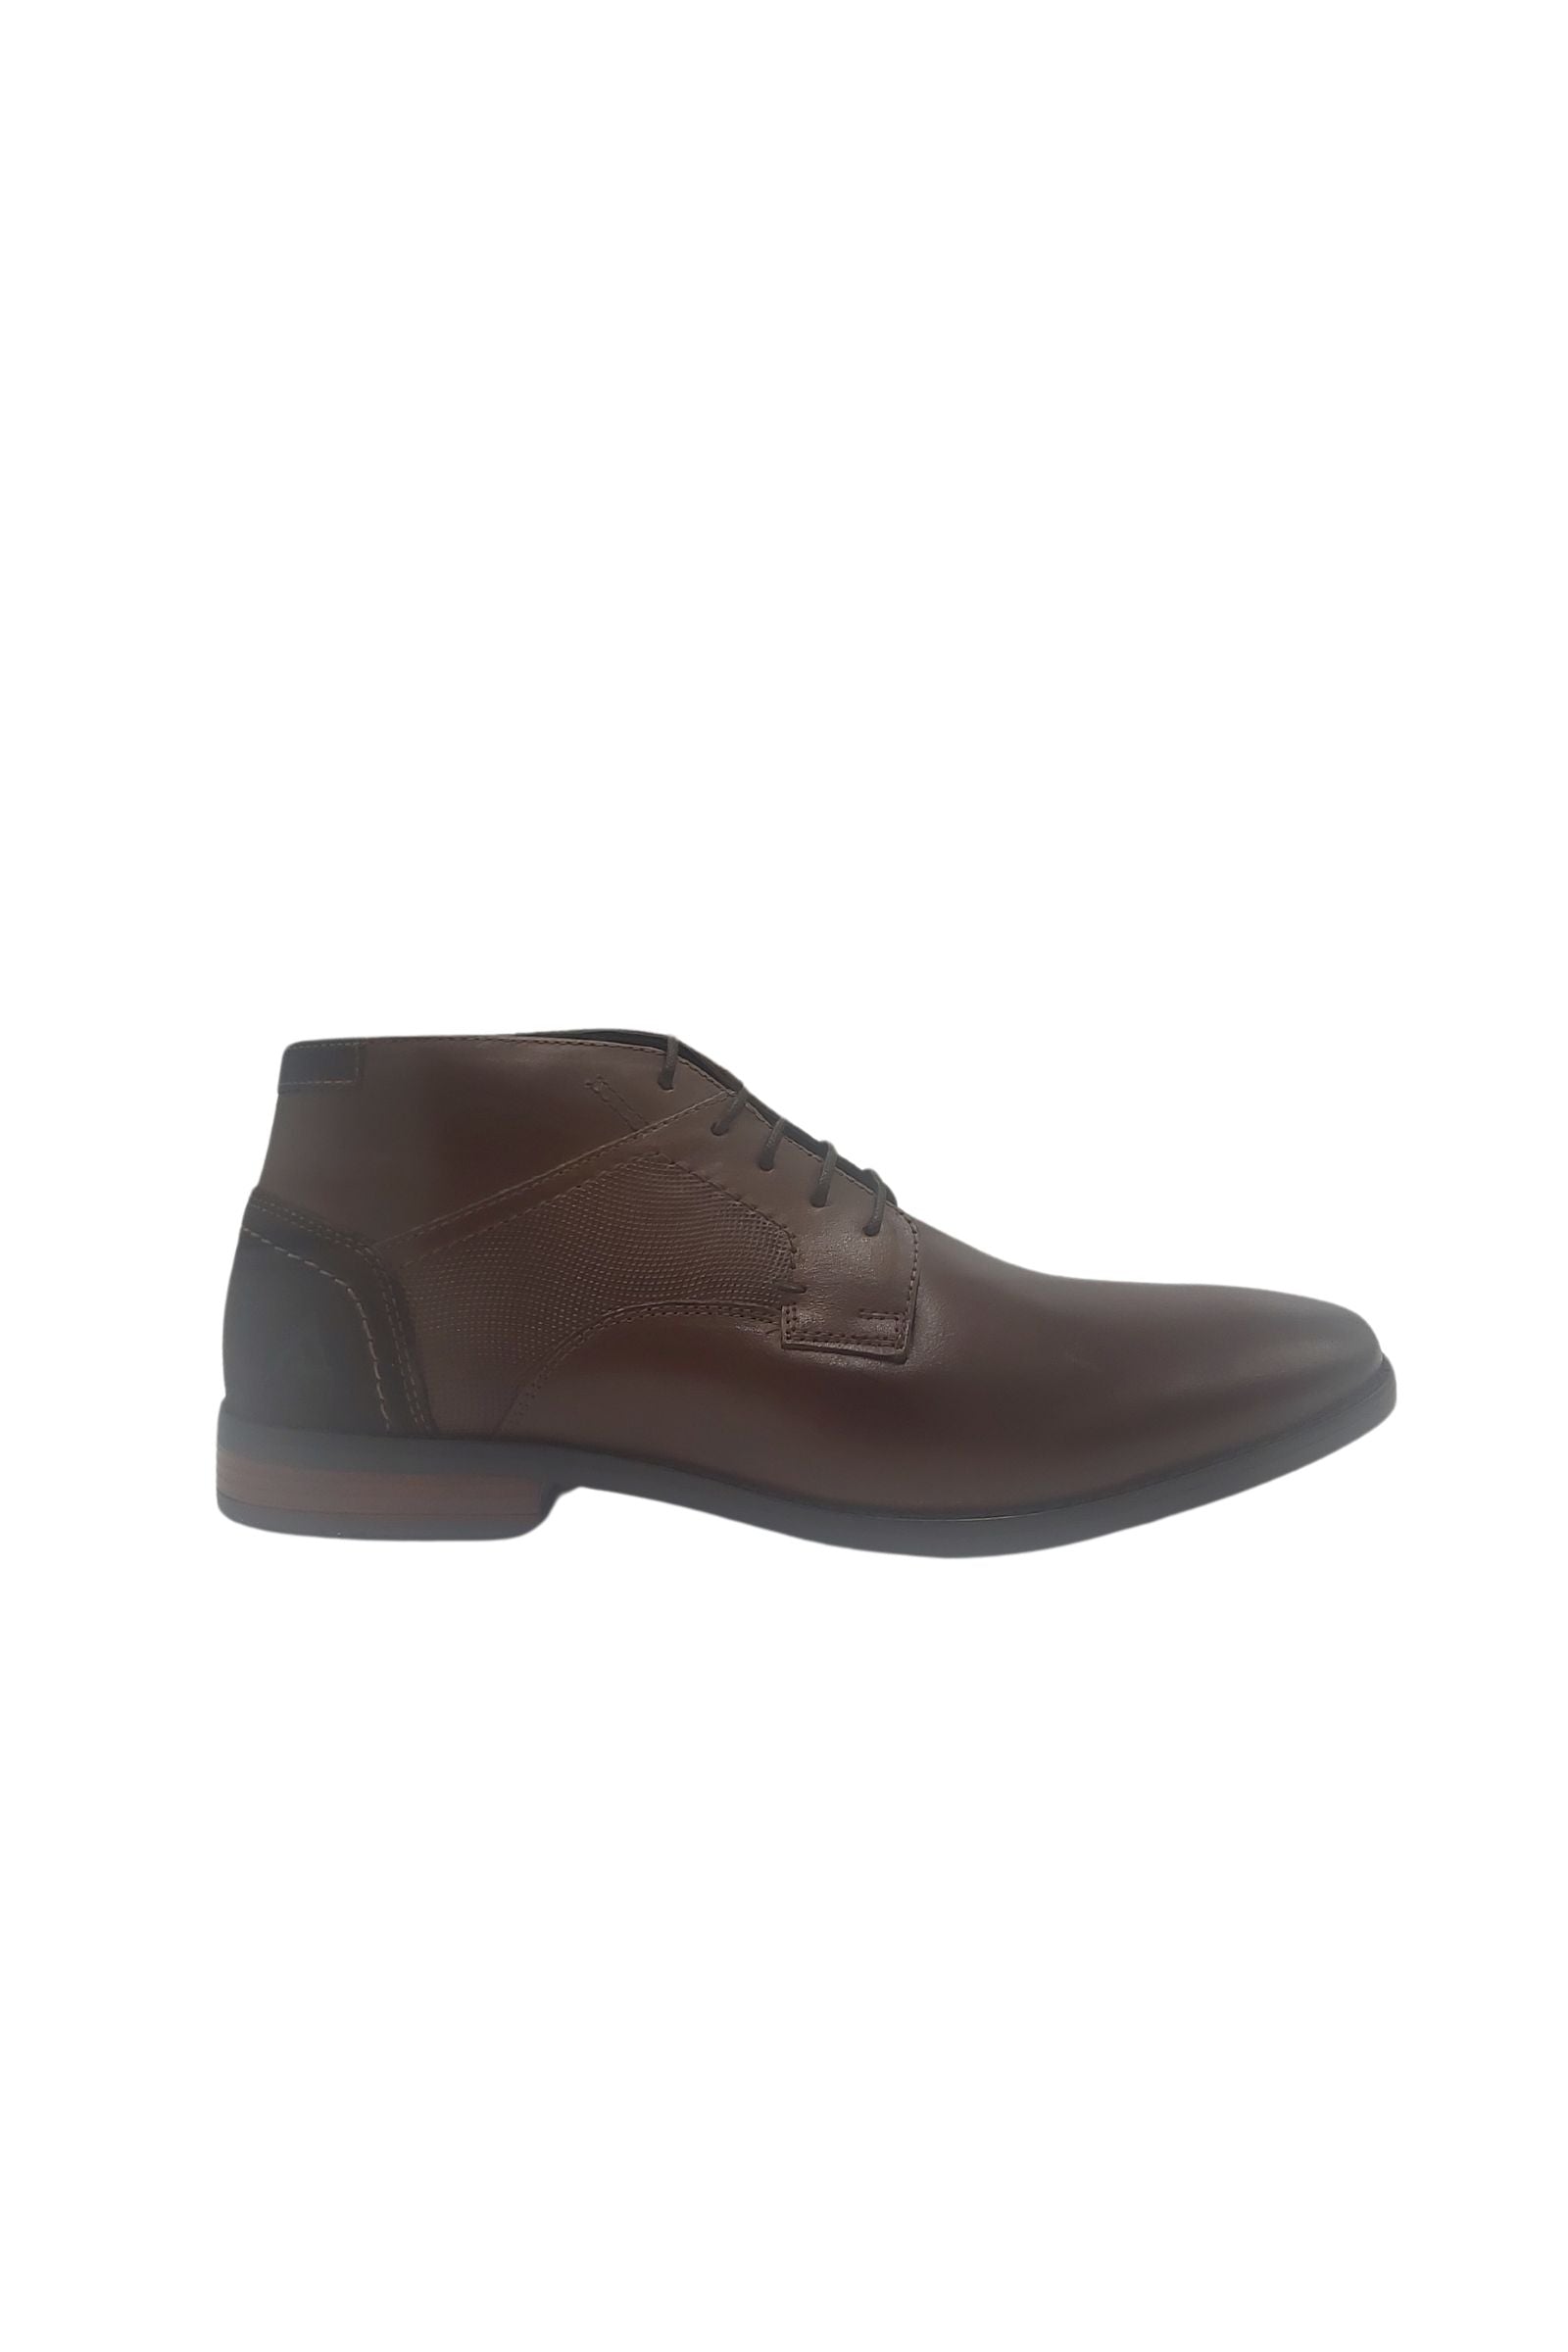 Men's Woodhaven Chestnut Ankle Boot-Side View